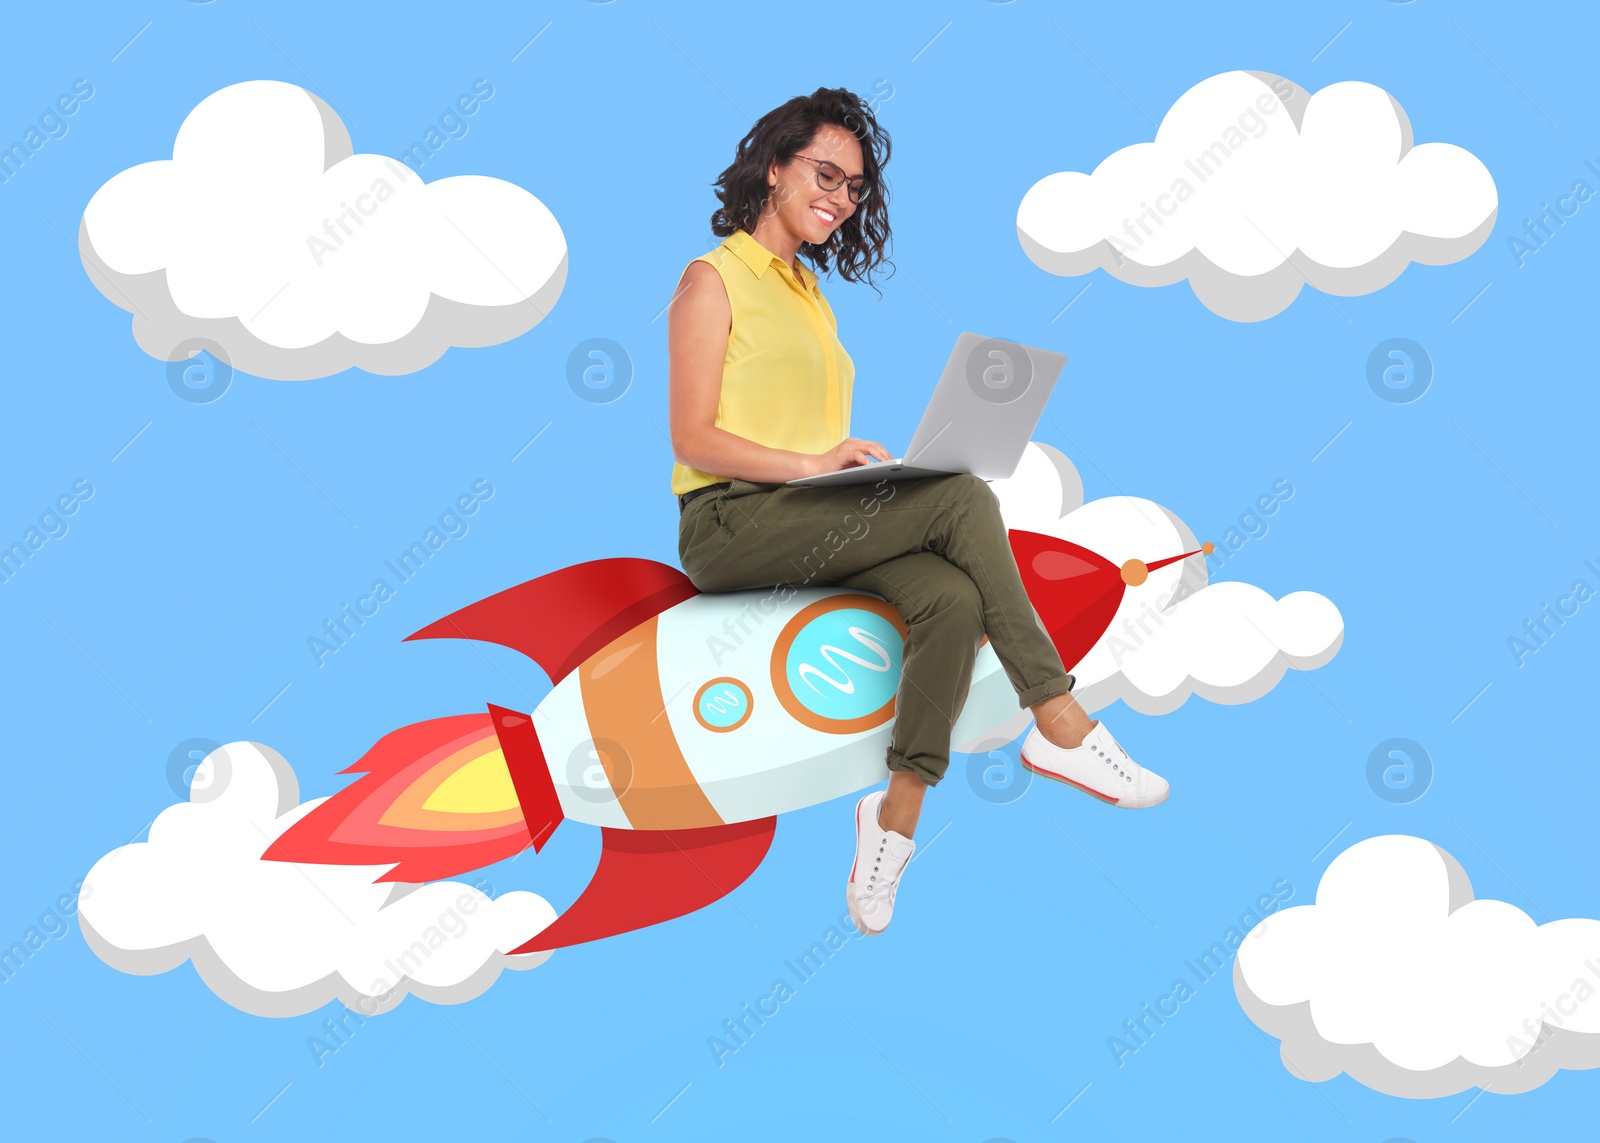 Image of Way to success. Happy young woman with laptop sitting on rocket rushing through sky. Illustration of spaceship and clouds